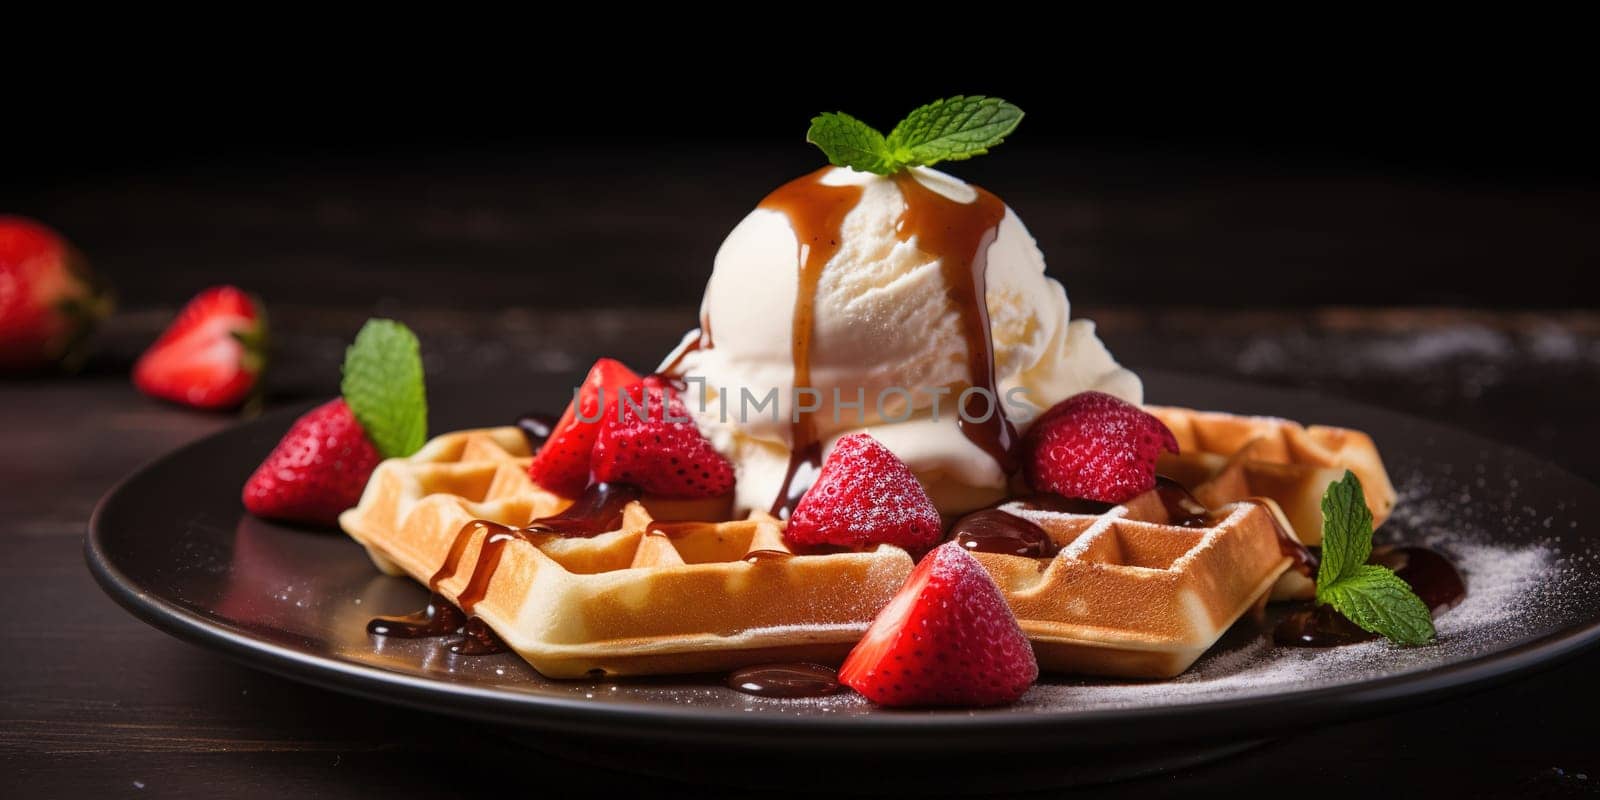 Delicious Waffle Dessert With Strawberries And Cream On A Plate, Dessert In Cafe